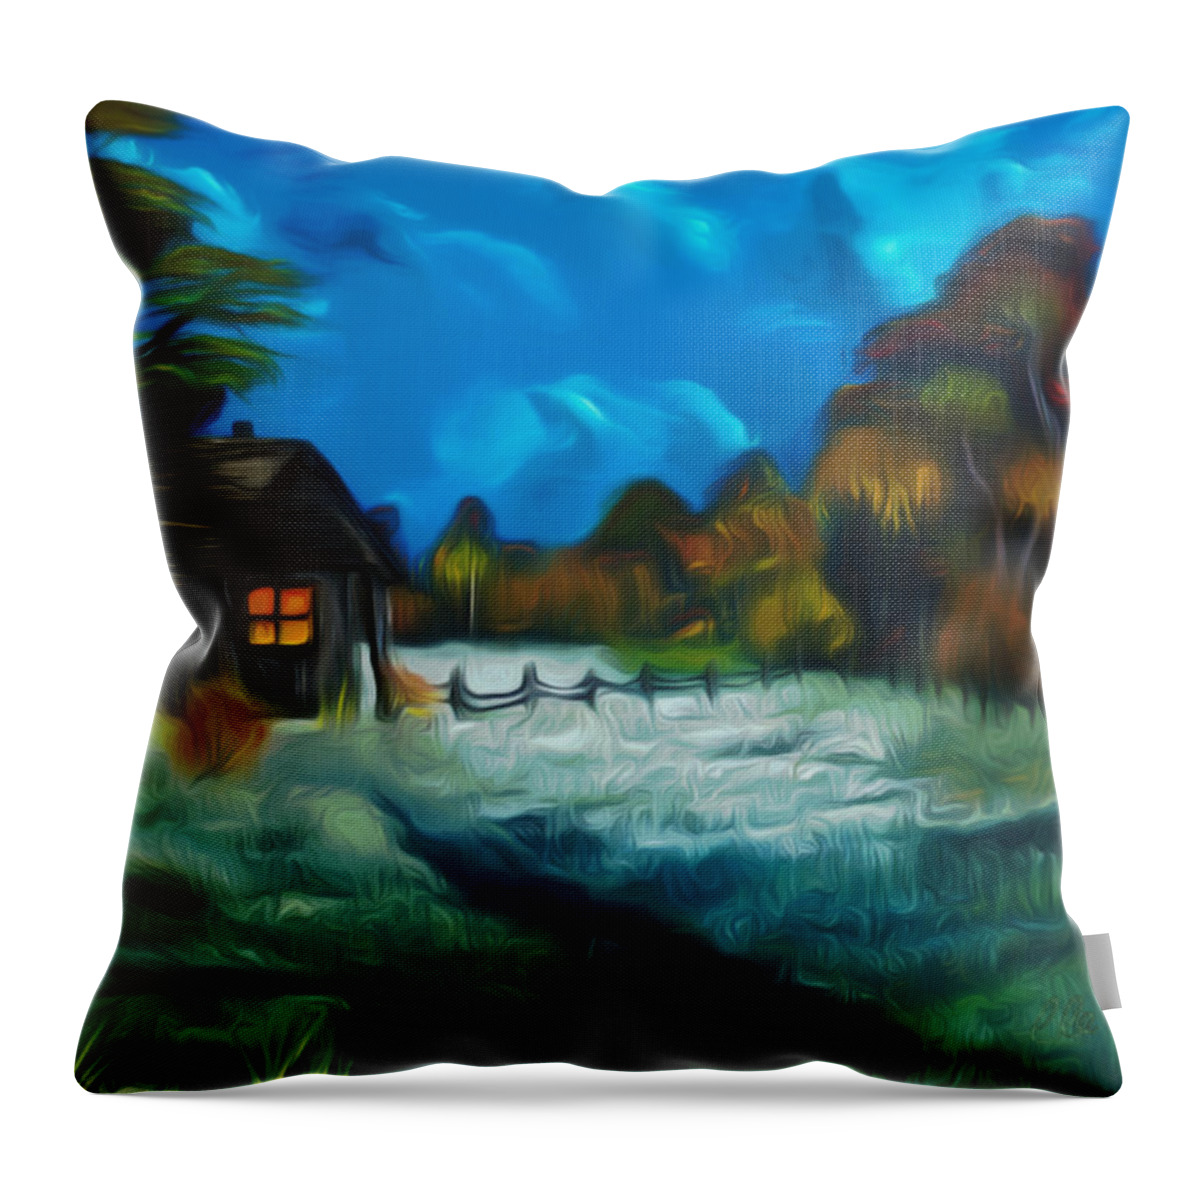 Farm Throw Pillow featuring the painting Little Pig's Barn In The Moonlight Dreamy Mirage by Claude Beaulac